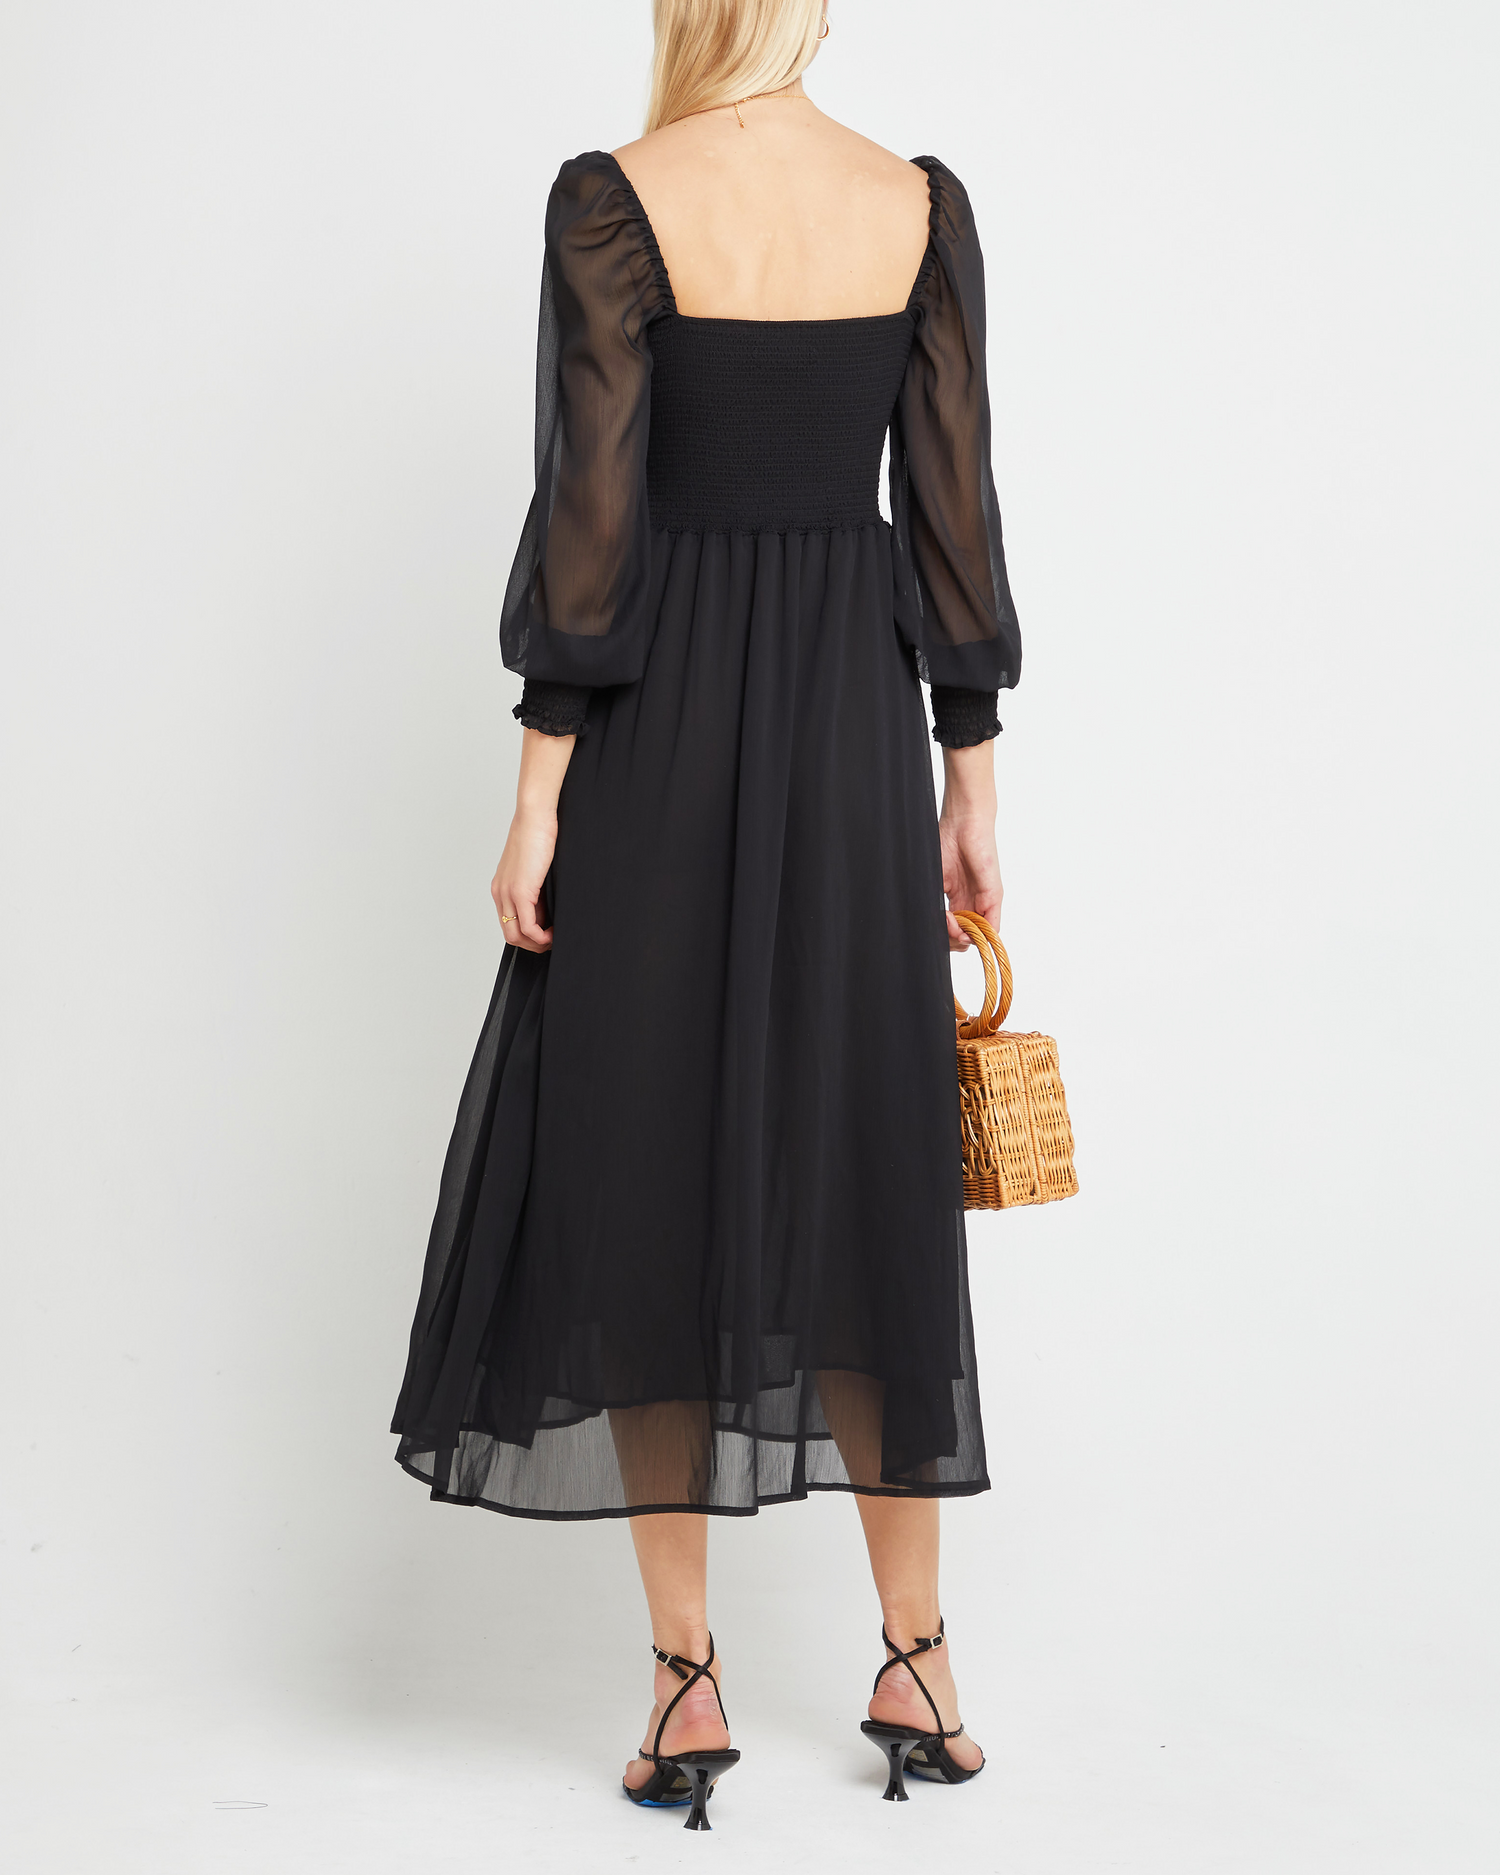 Second image of Classic Smocked Maxi Dress, a black maxi dress, side slit, long, sheer sleeves, puff sleeves, suqare neckline, smocke bodice